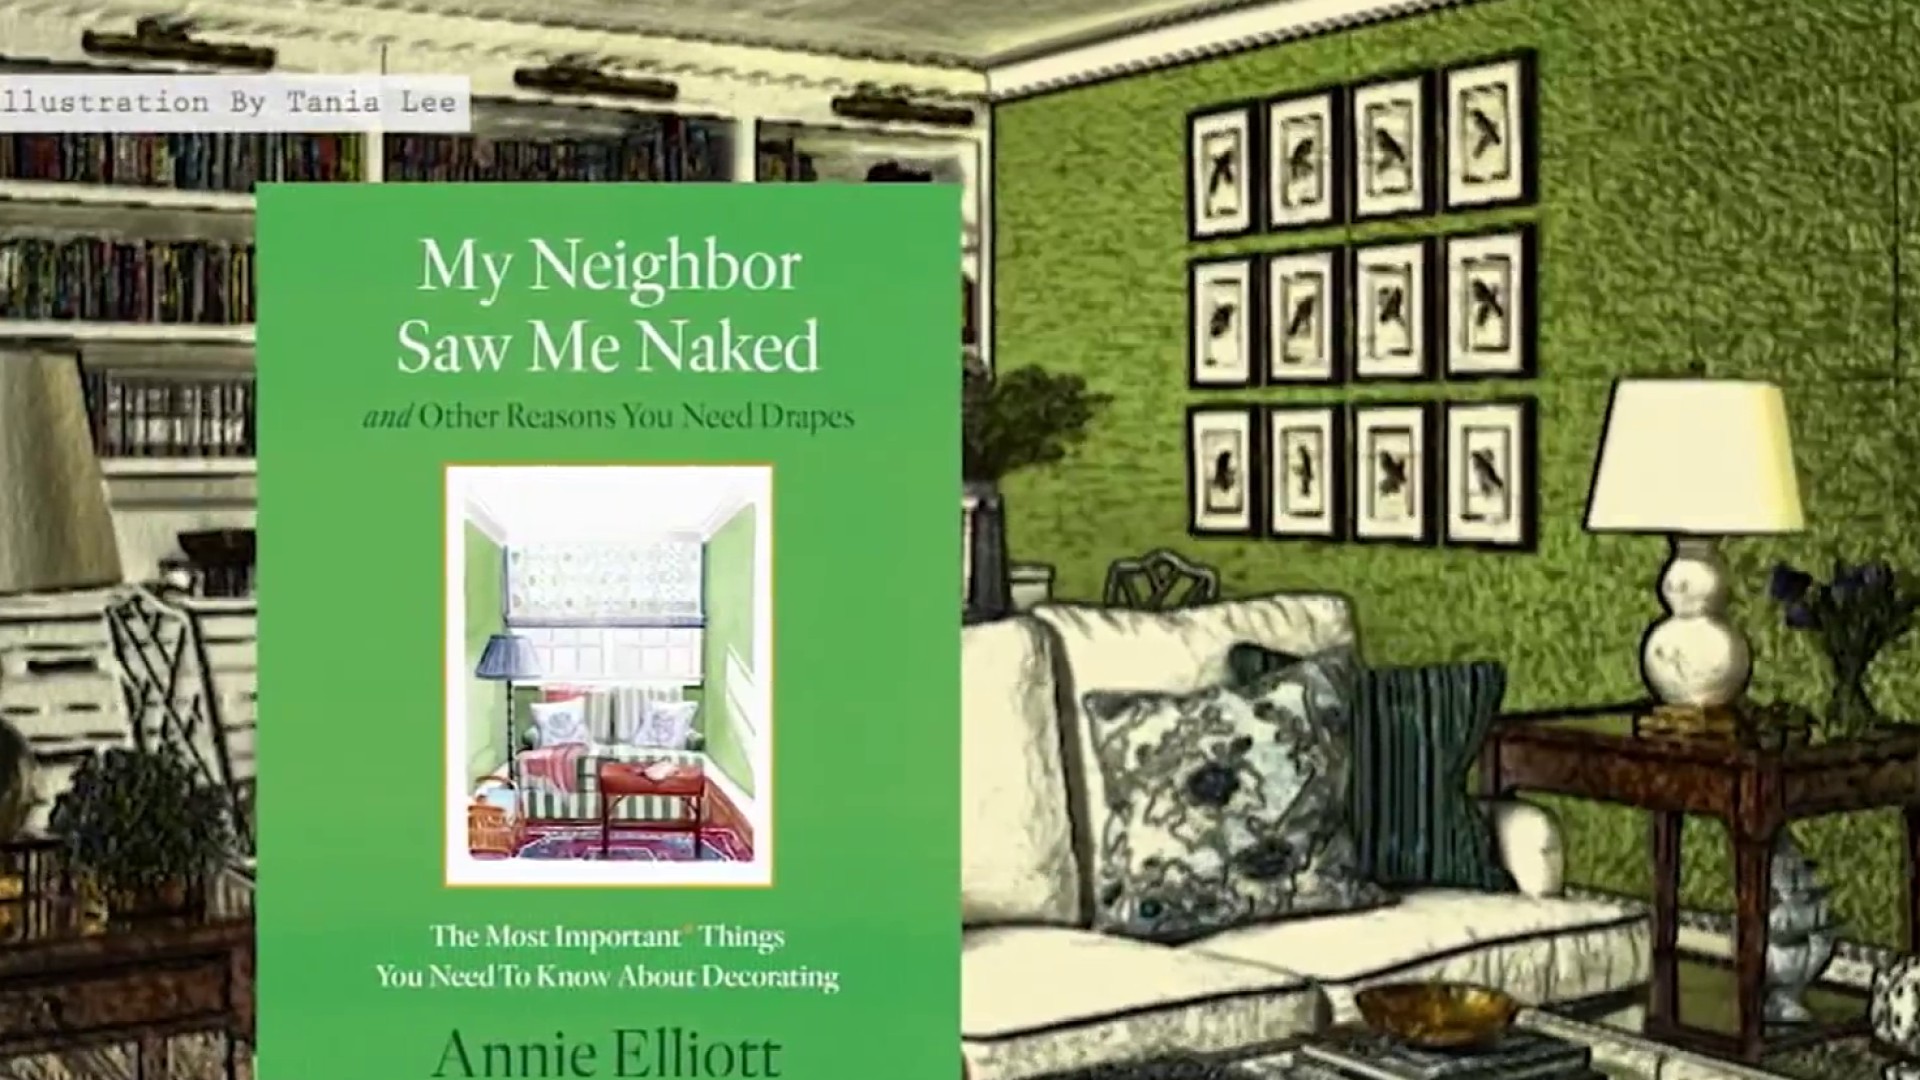 My Neighbor Saw Me Naked Book highlights the importance of drapes